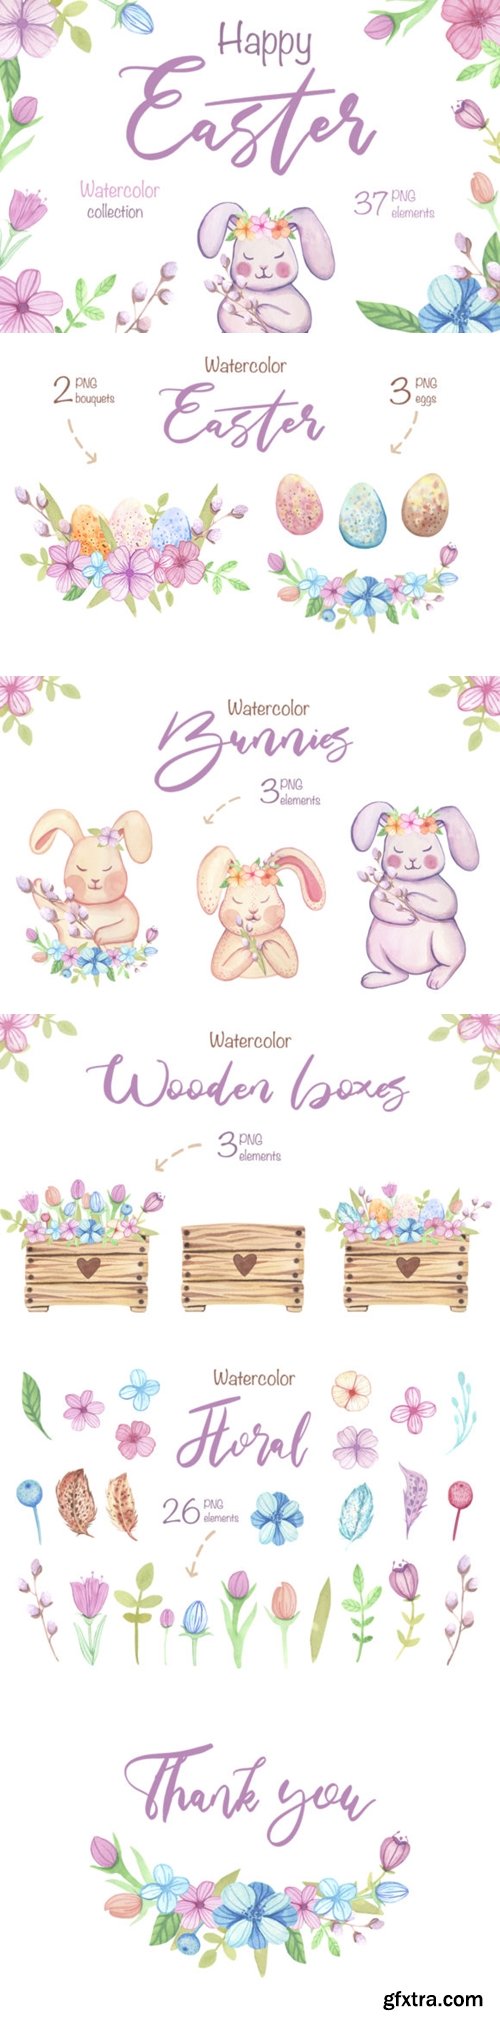 Watercolor Happy Easter Clipart 3662486